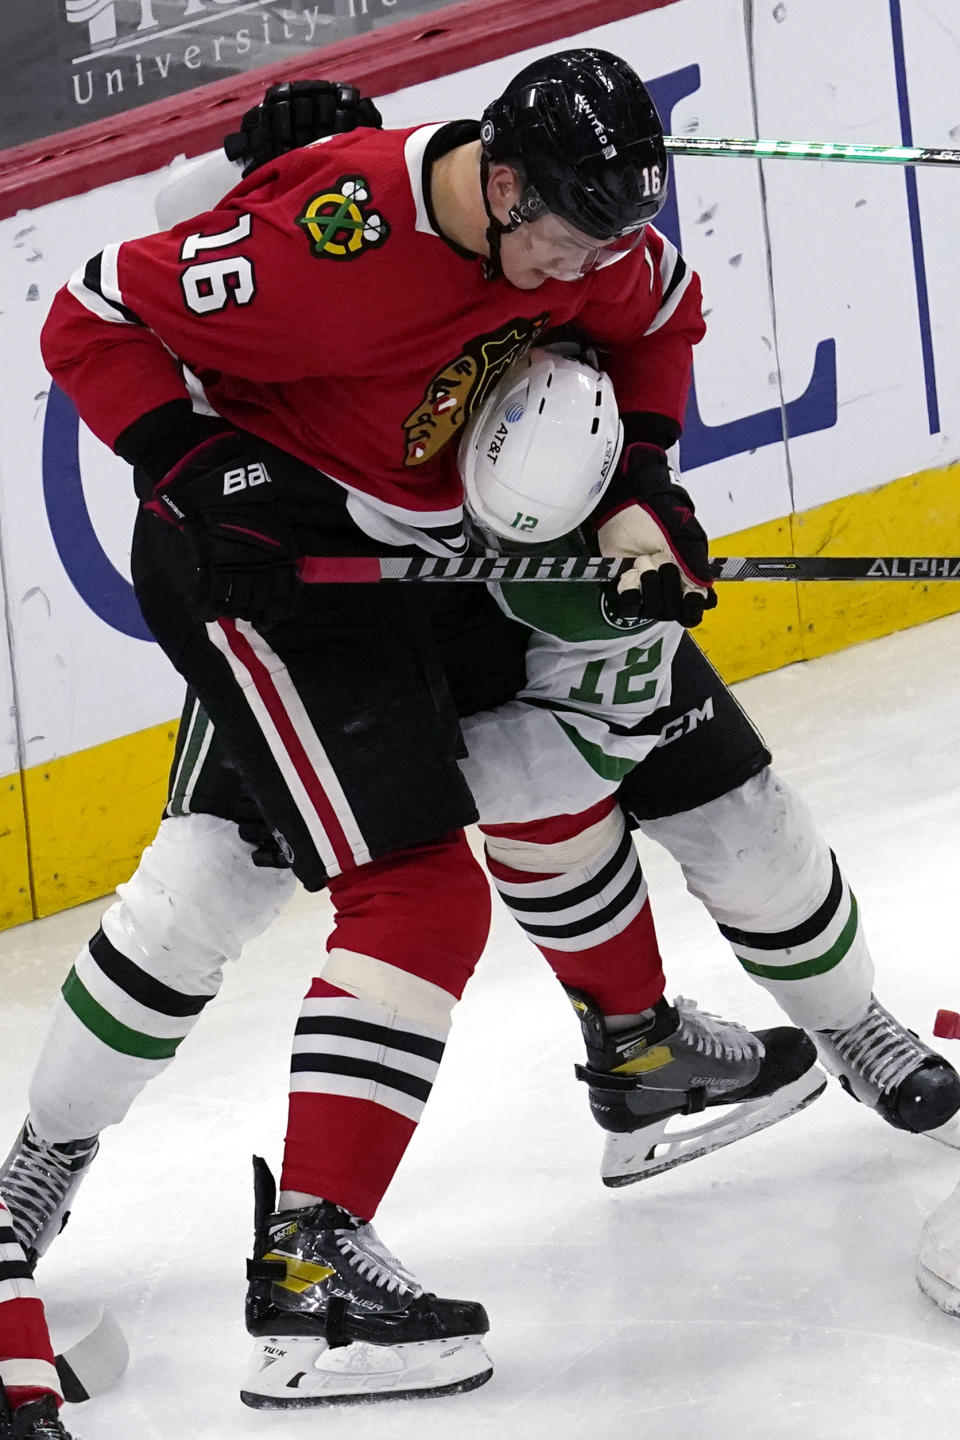 Chicago Blackhawks defenseman Nikita Zadorov, left, works for the puck against Dallas Stars center Radek Faksa during the second period of an NHL hockey game in Chicago, Sunday, May 9, 2021. (AP Photo/Nam Y. Huh)